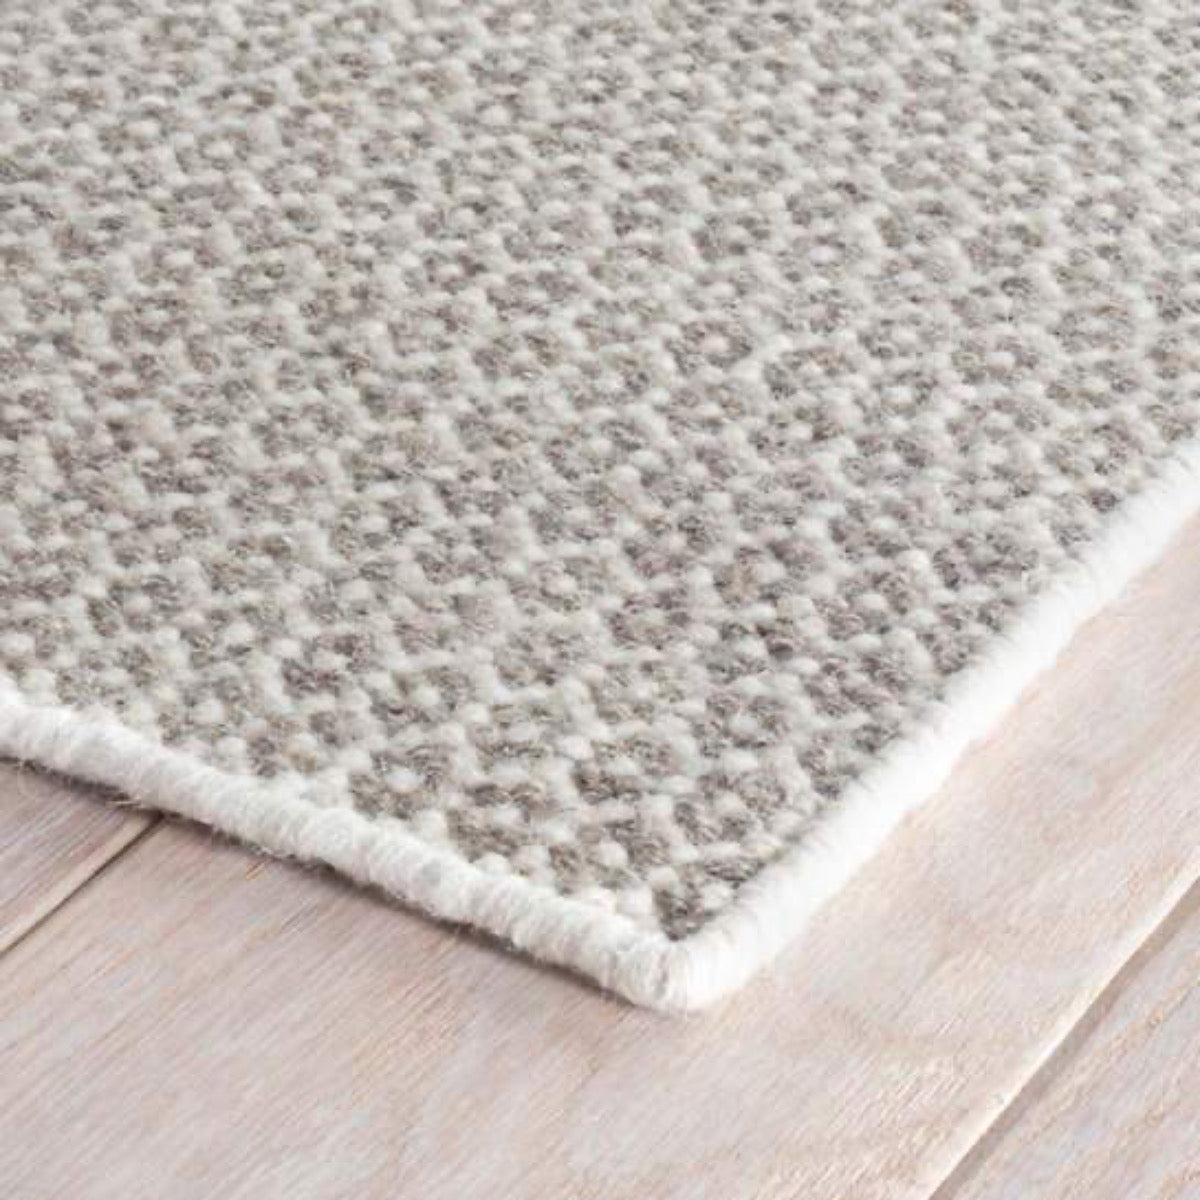 Honeycomb Ivory/Grey Woven Wool Rug. Top view. 